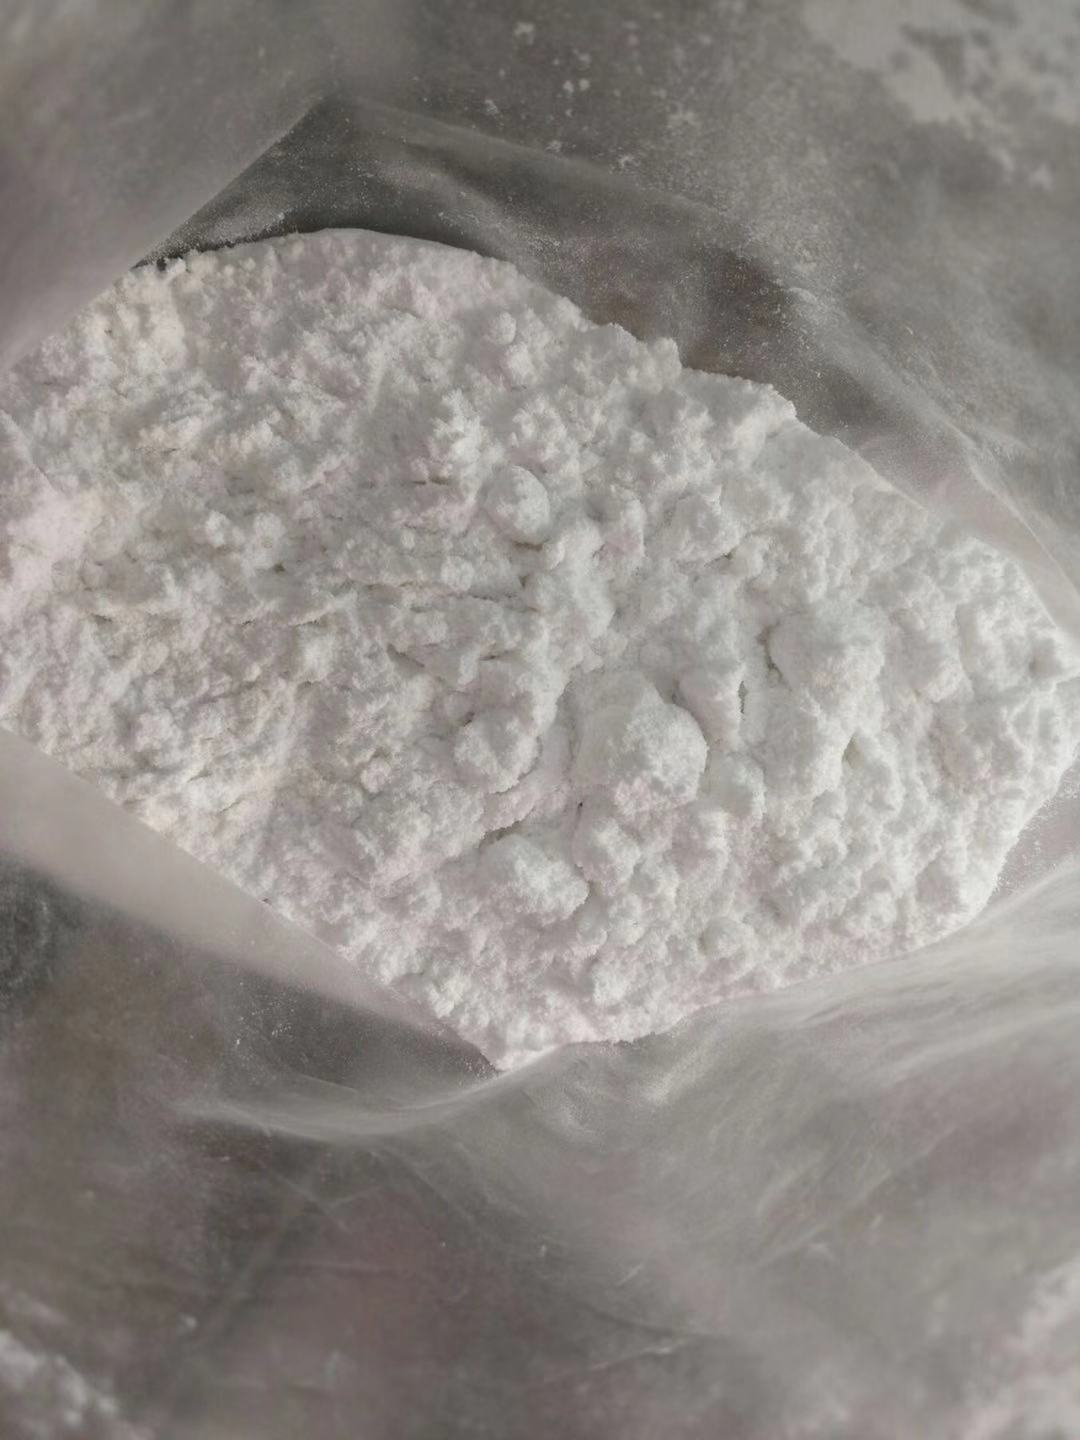 Supply High Purity Levamisole CAS 14769-73-4 Levamisole Powder With Safe Shipment